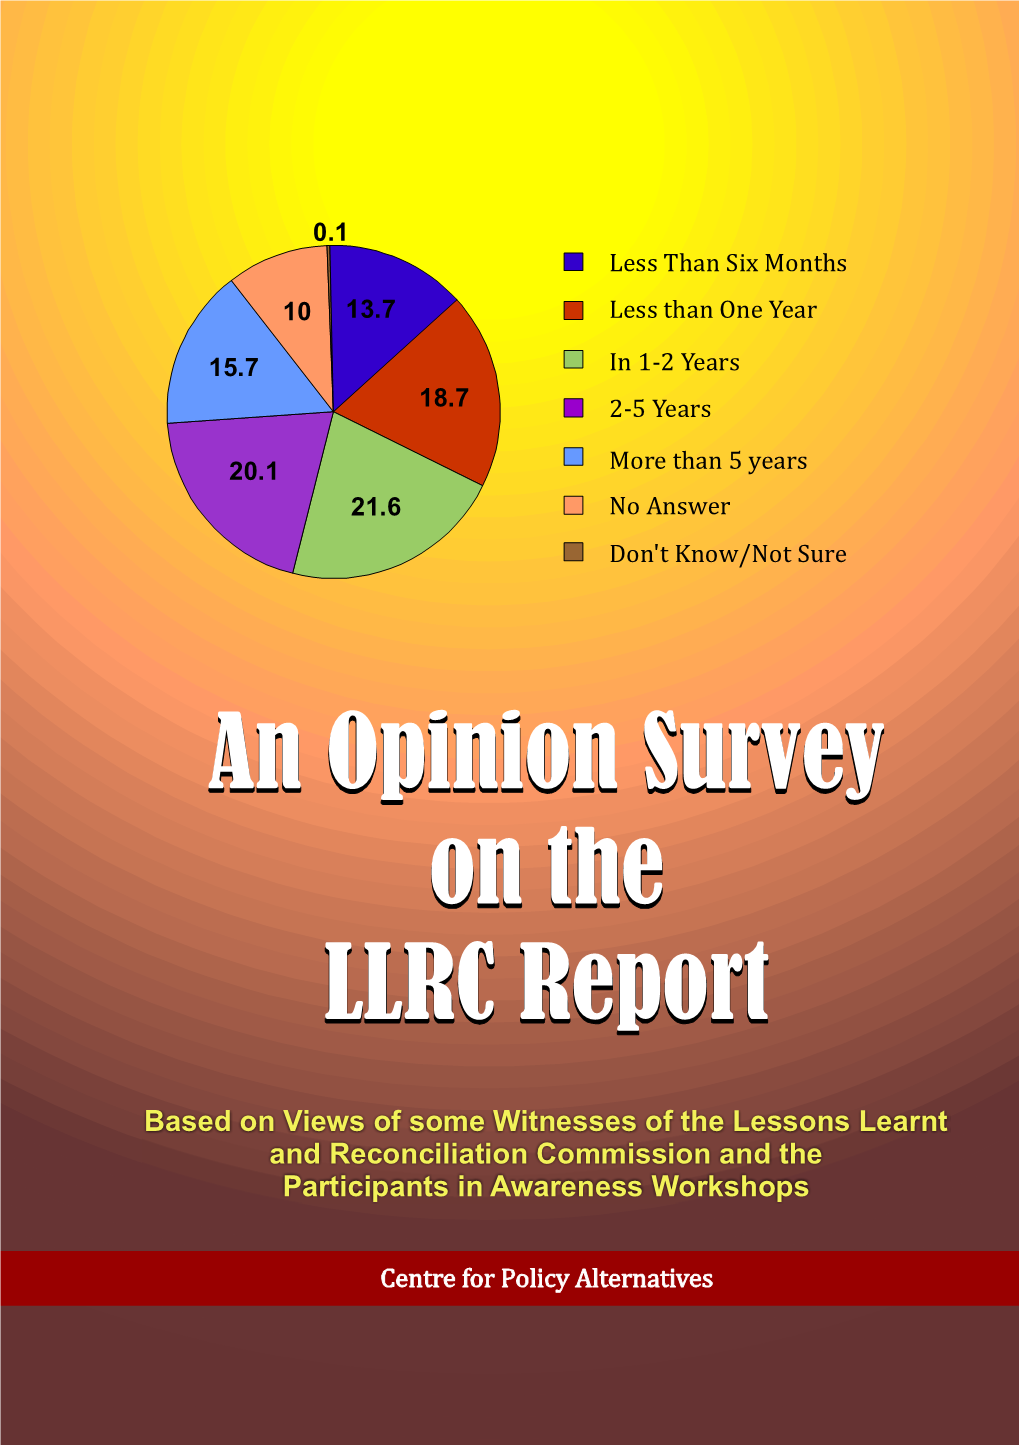 An Opinion Survey on the LLRC Report